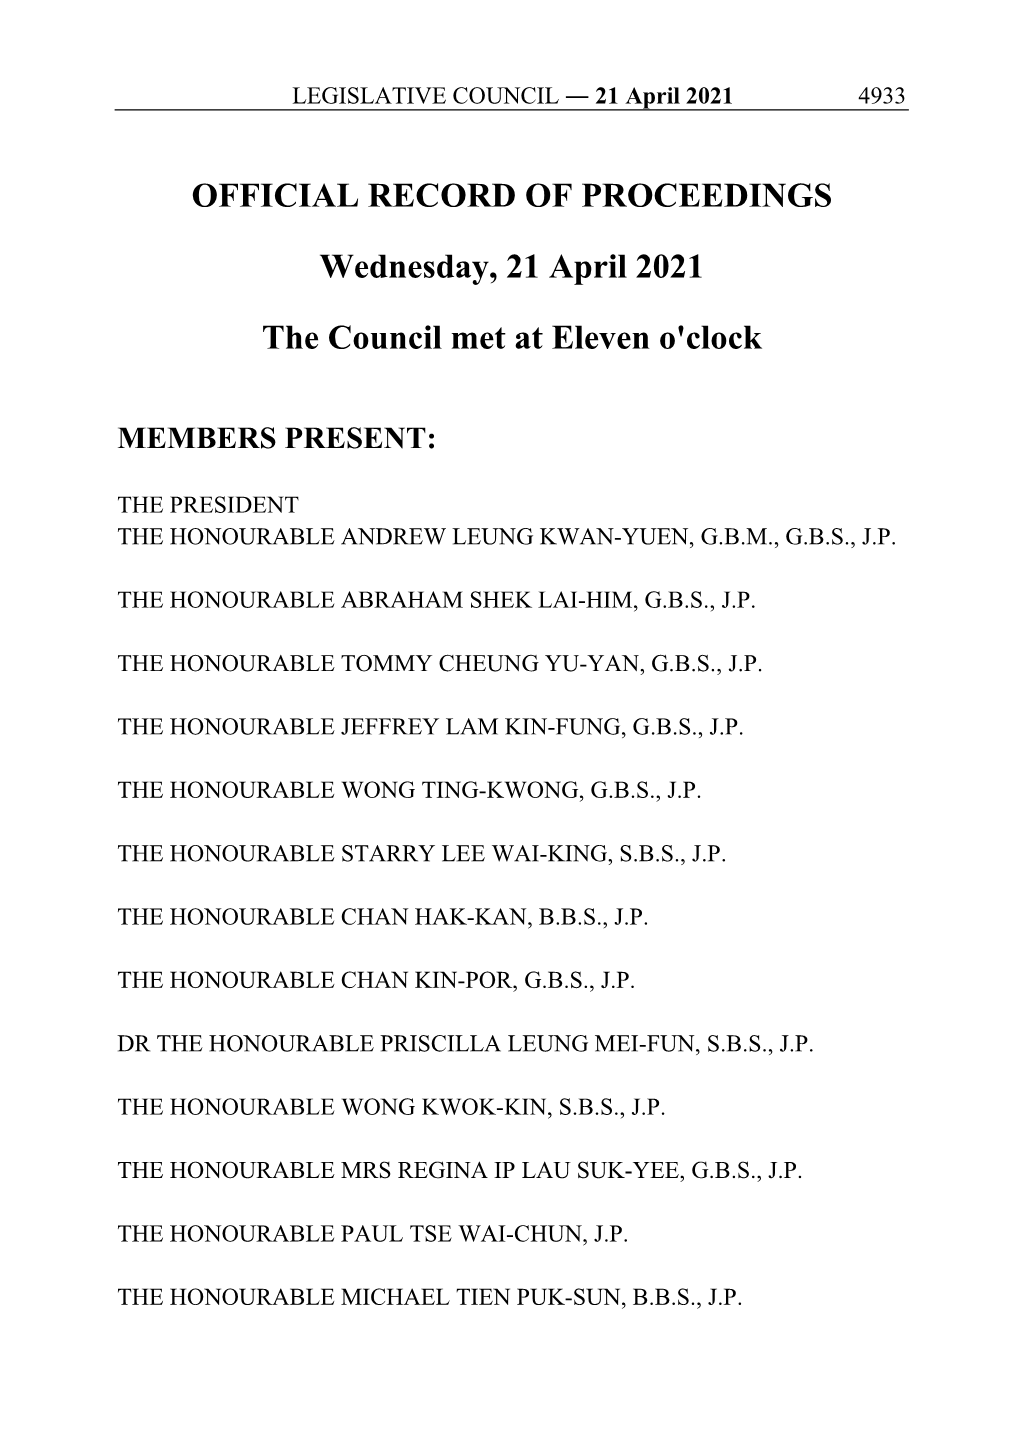 OFFICIAL RECORD of PROCEEDINGS Wednesday, 21